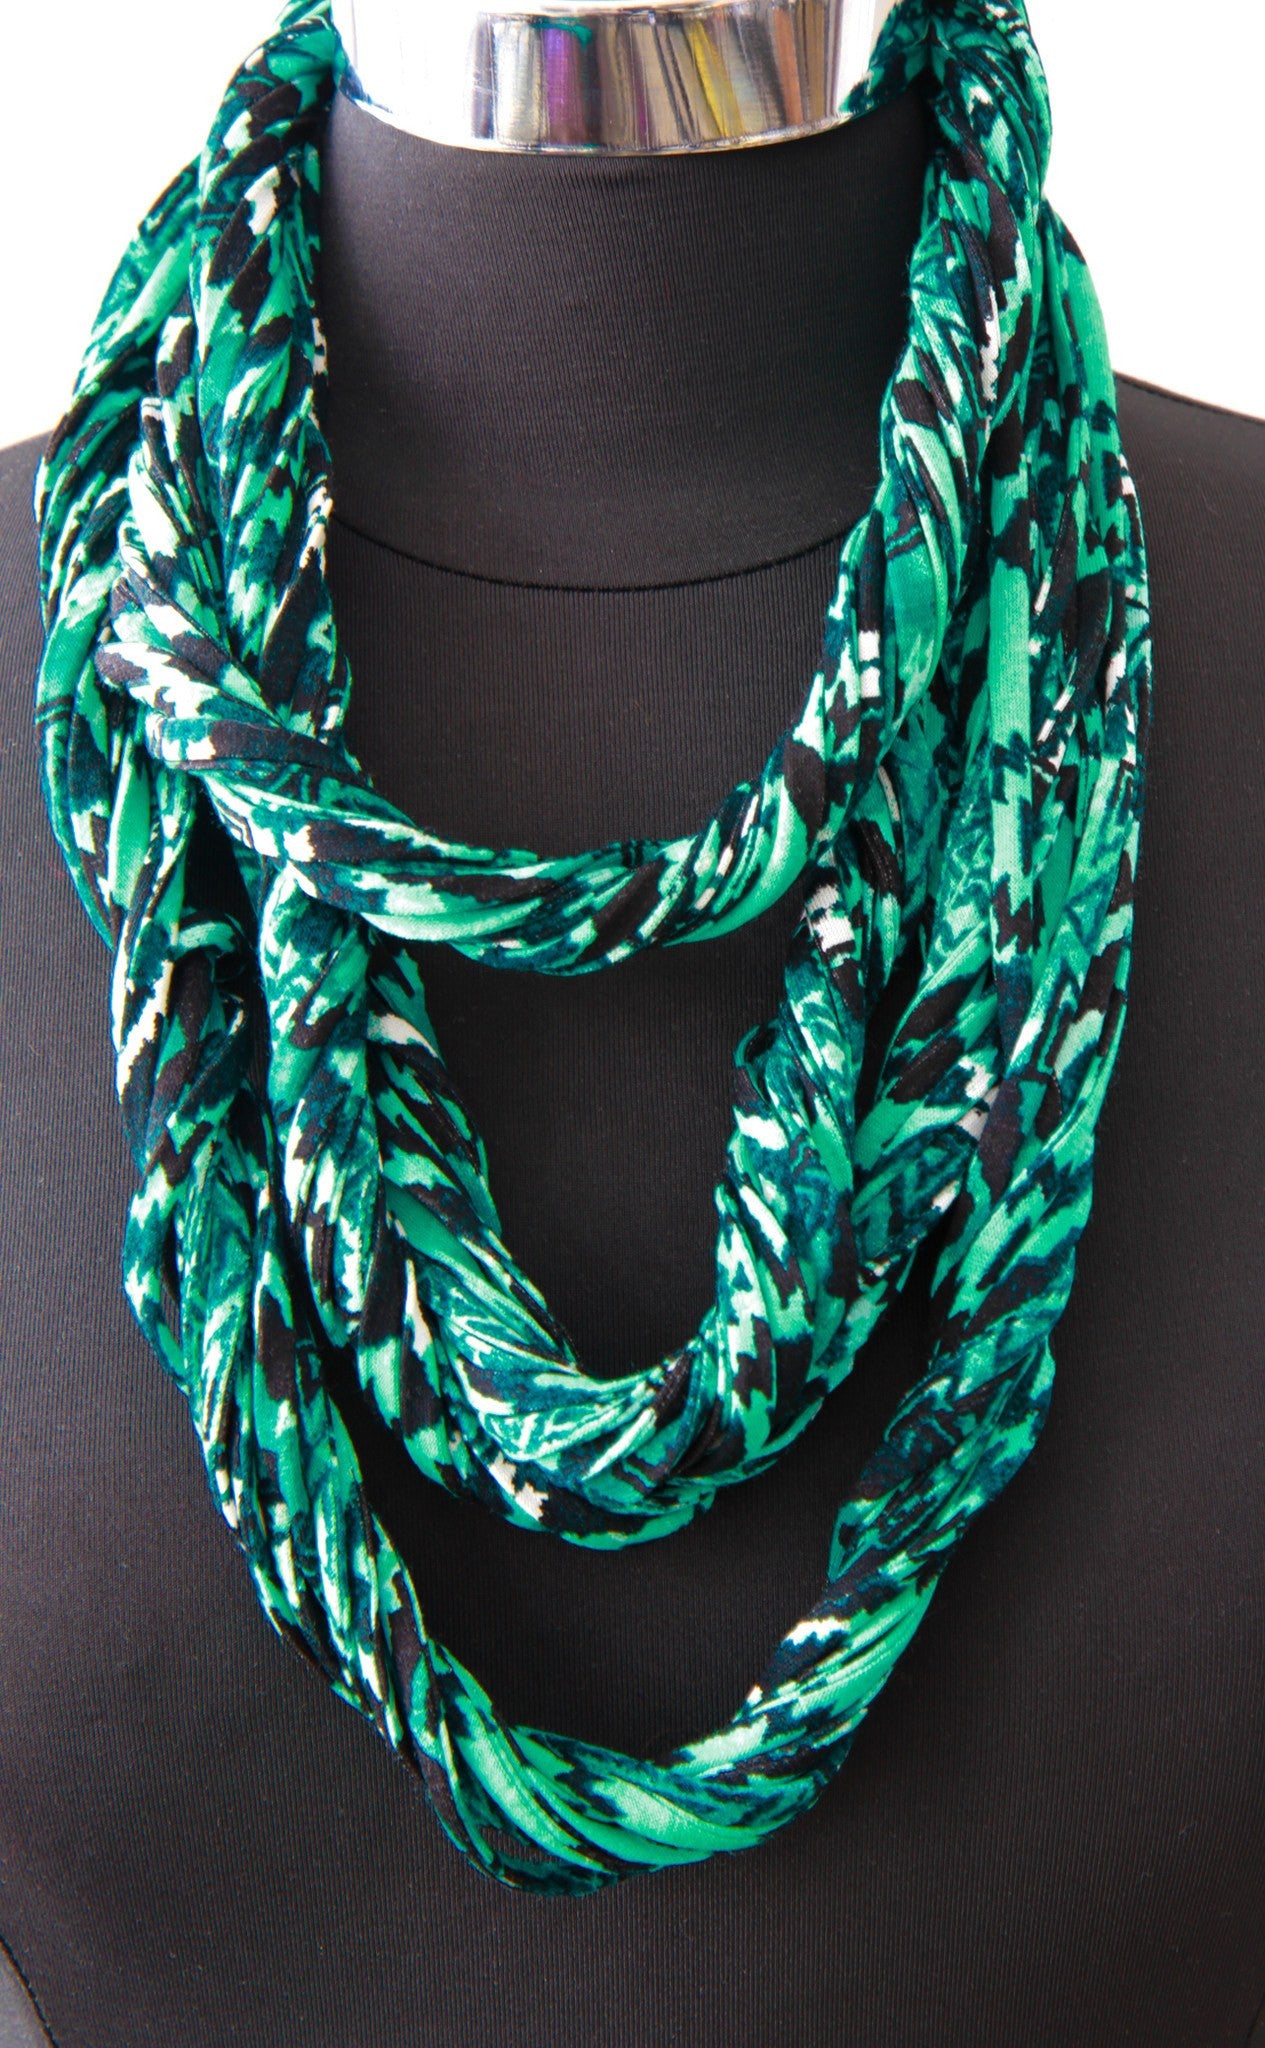 Teal Print Infinity Scarf or Necklace for Women